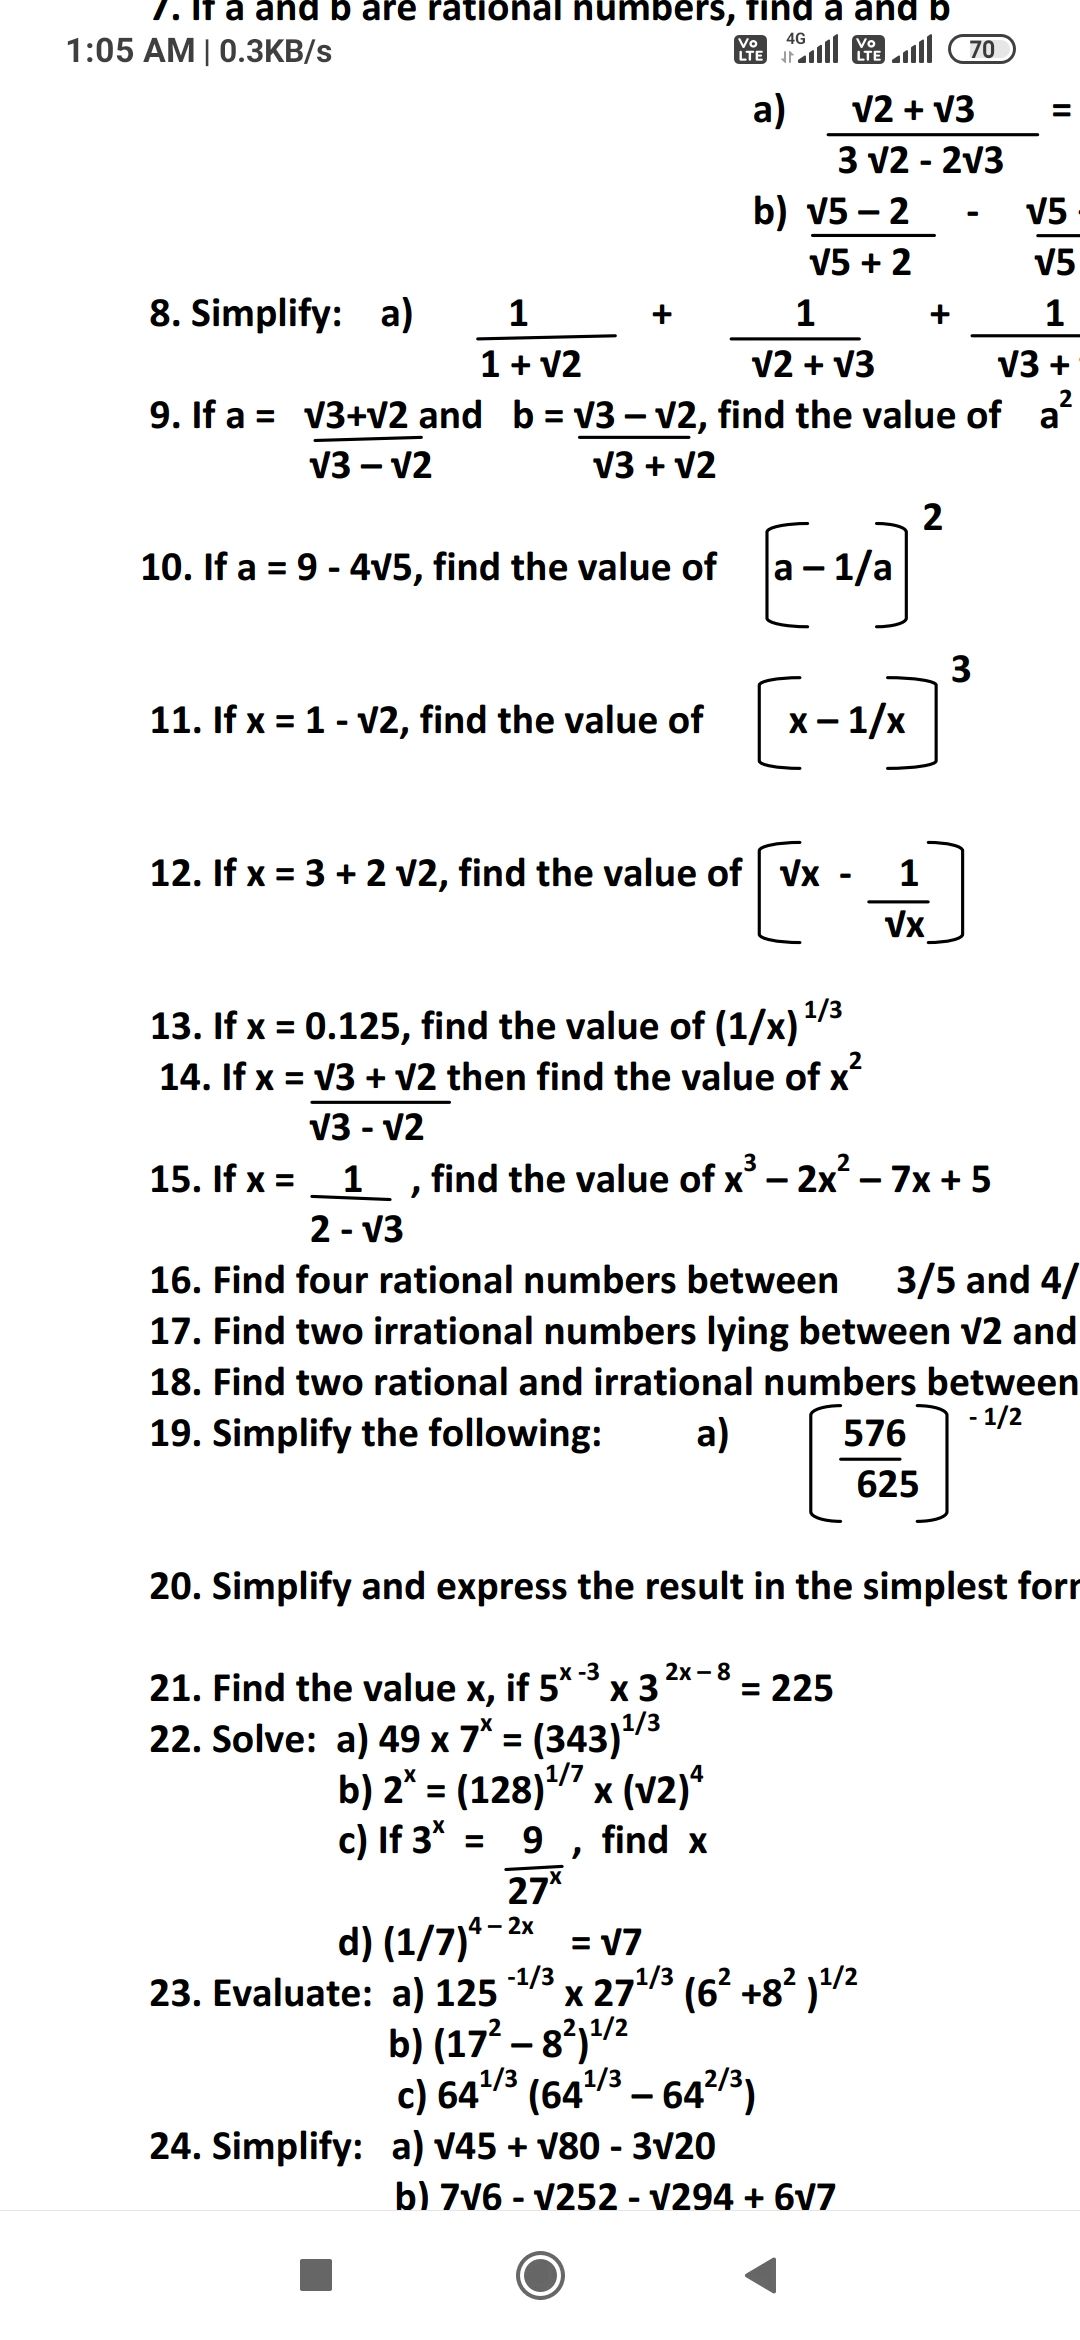 irrational-numbers-number-system-notes-questions-answers-for-cbse-class-9-topperlearning